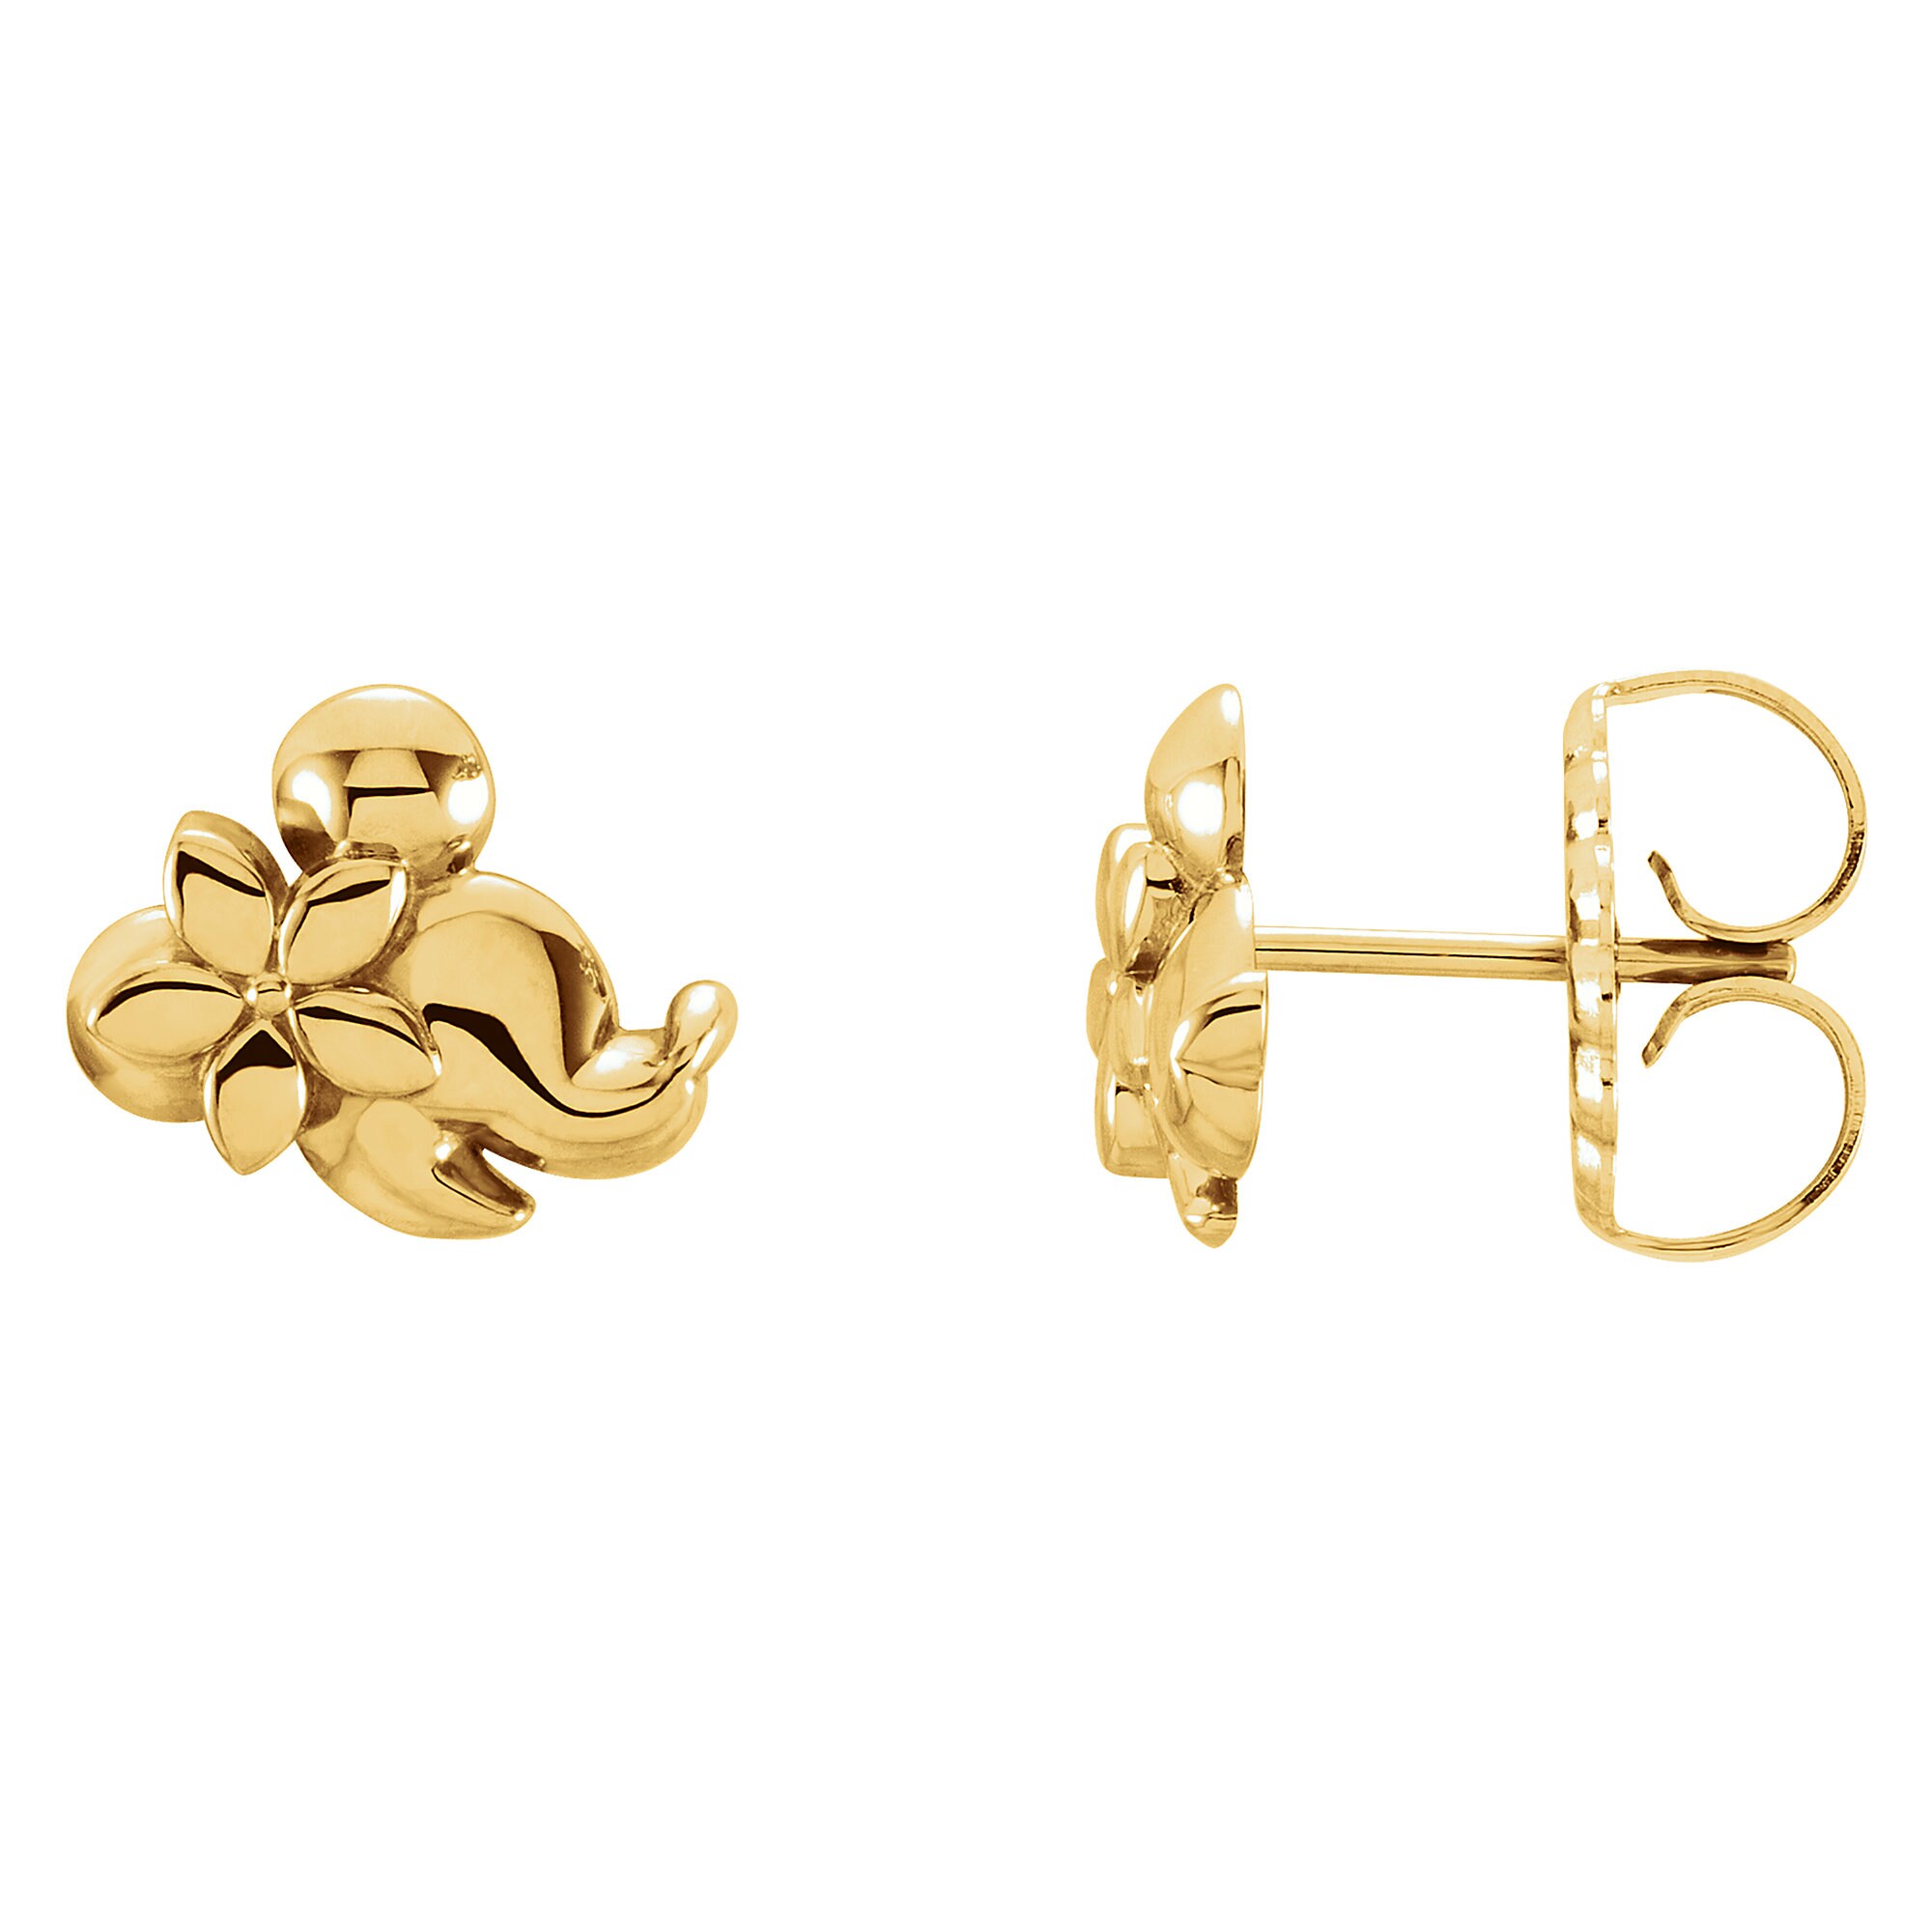 Minnie Mouse Gold Earrings - Aulani, A Disney Resort & Spa is now ...